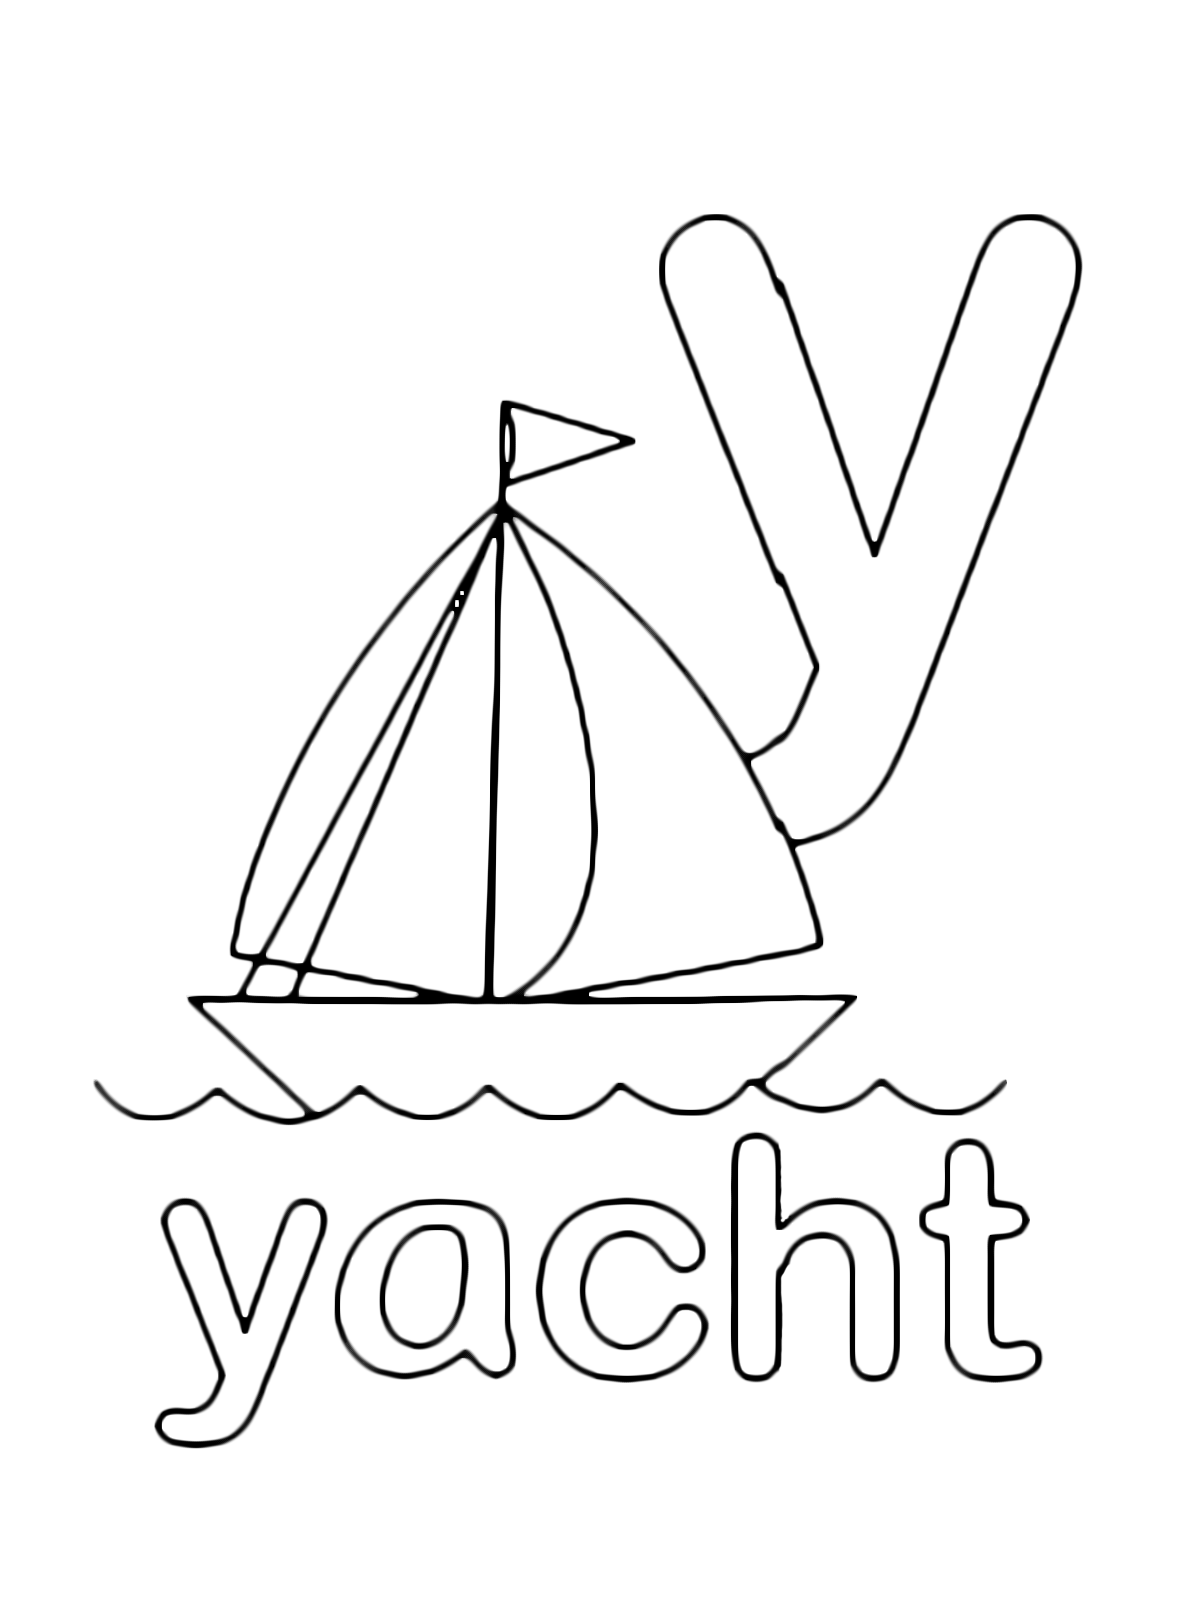 Letters and numbers - y for yachr lowercase letter